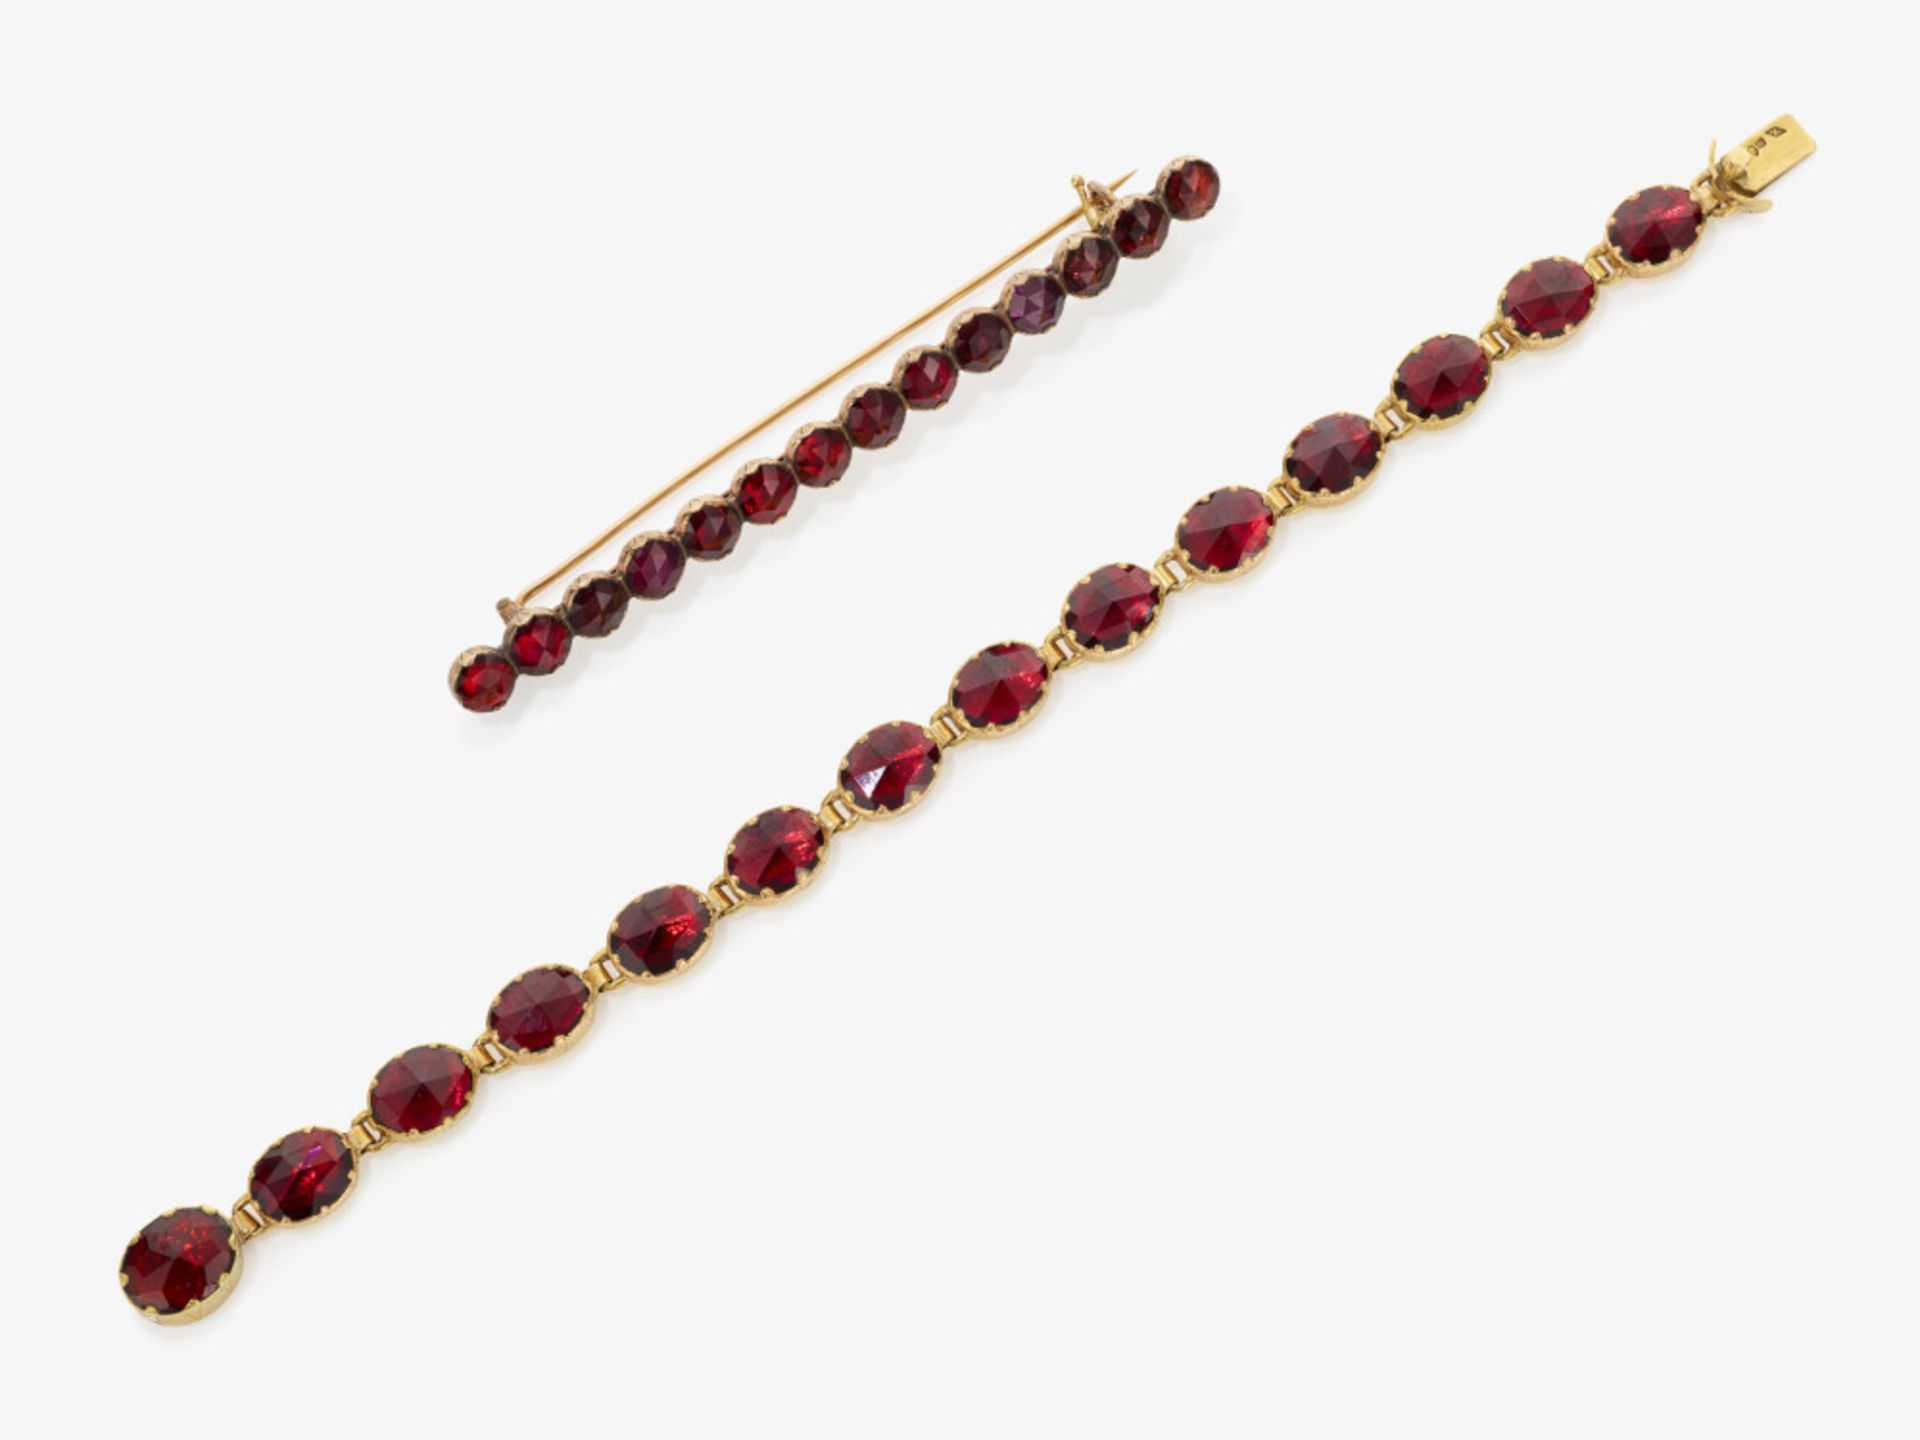 A historical bracelet and bar pin decorated with garnets